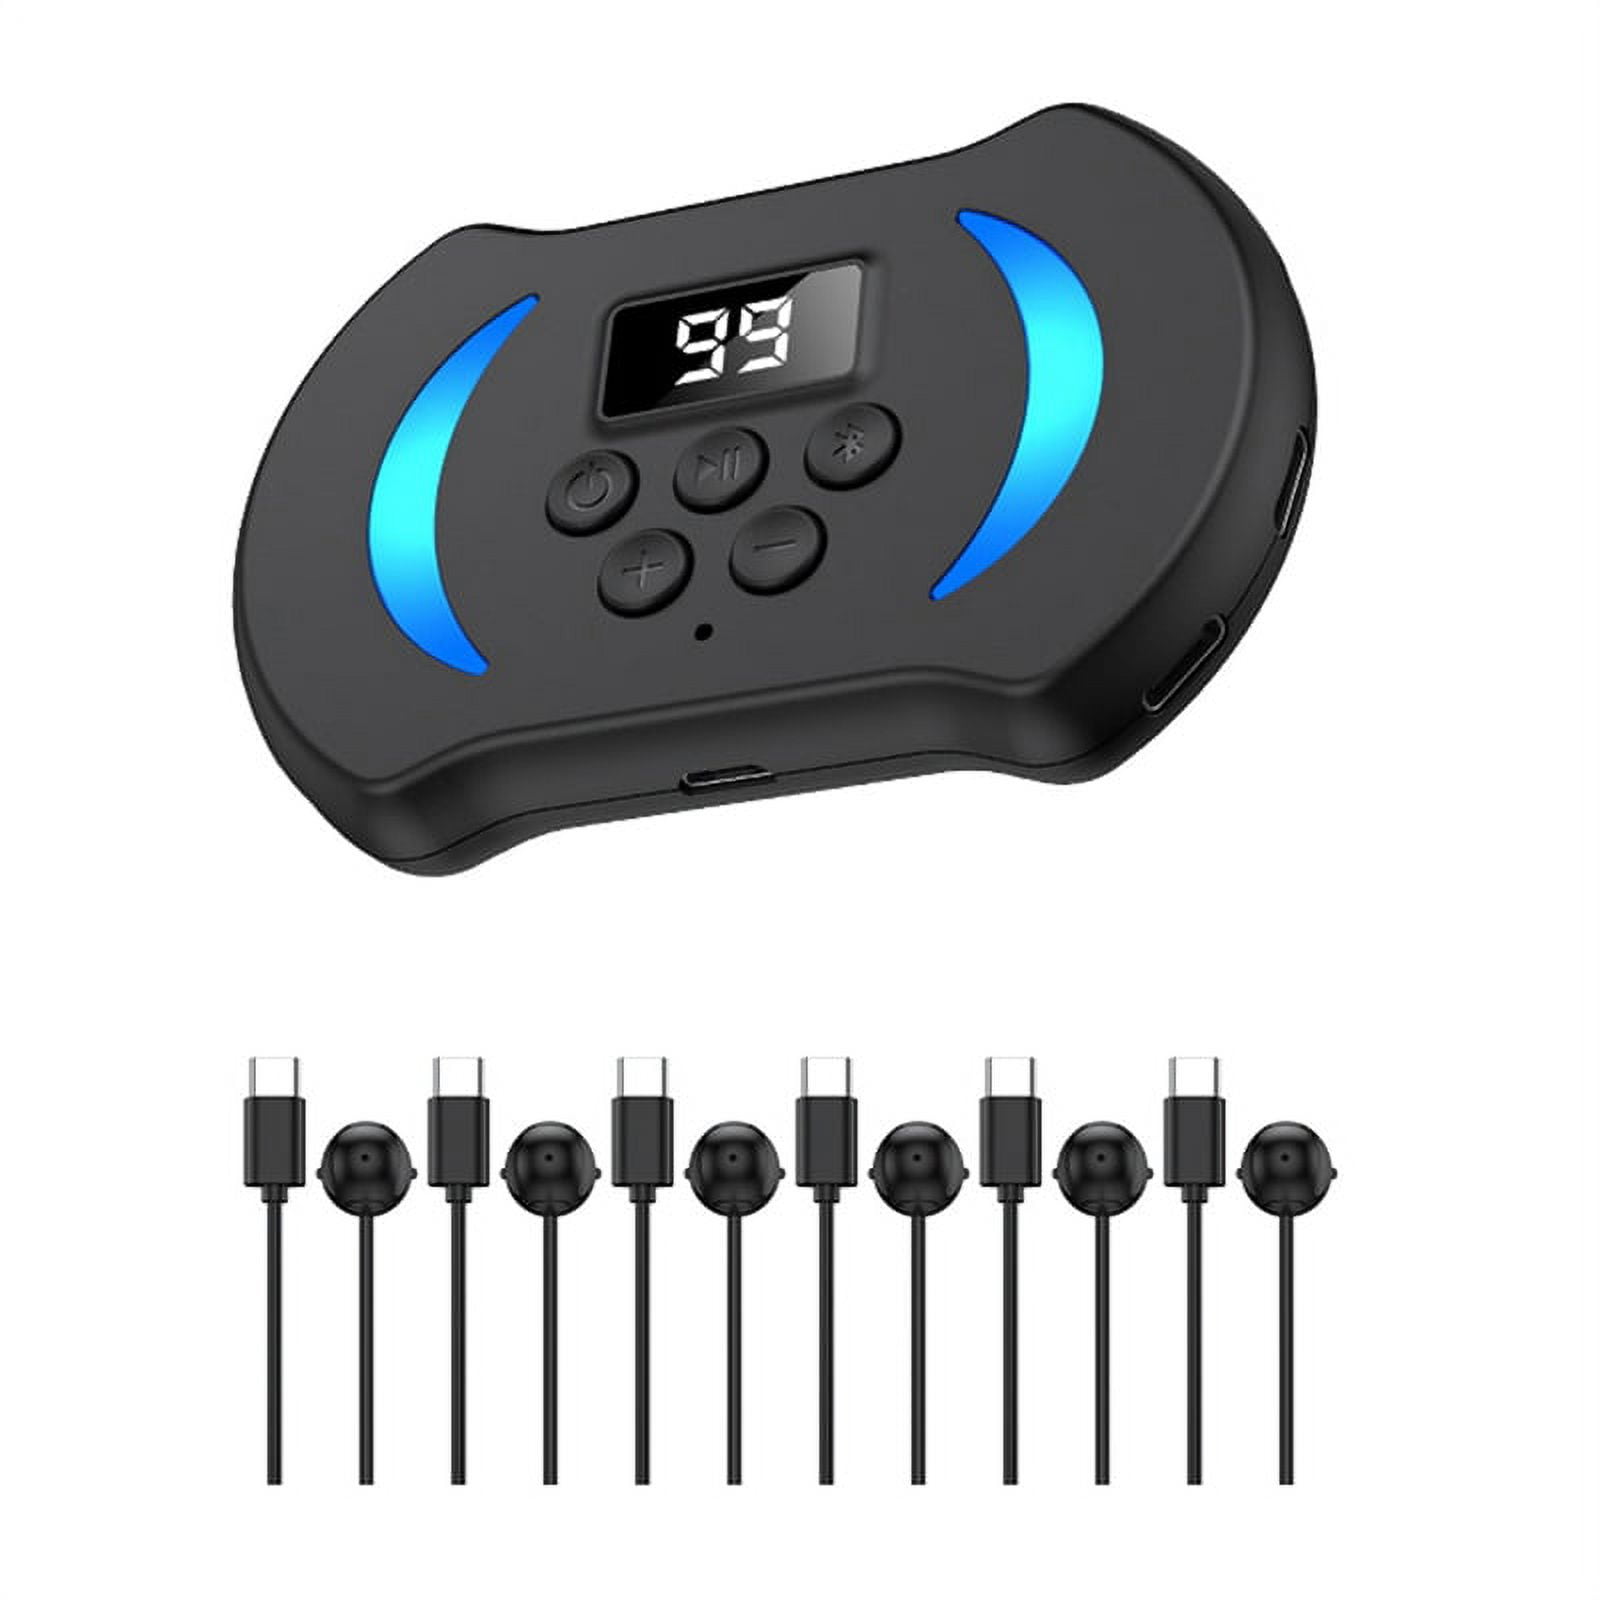  Auto Screen Clicker Device M6, Automatic Clip-on Phone Screen  Tapper, Smart Adjustable Speed Simulated Finger Clicking for Games, Giving  a like etc, has recording function (Support 5 Ports 10 Screens) 